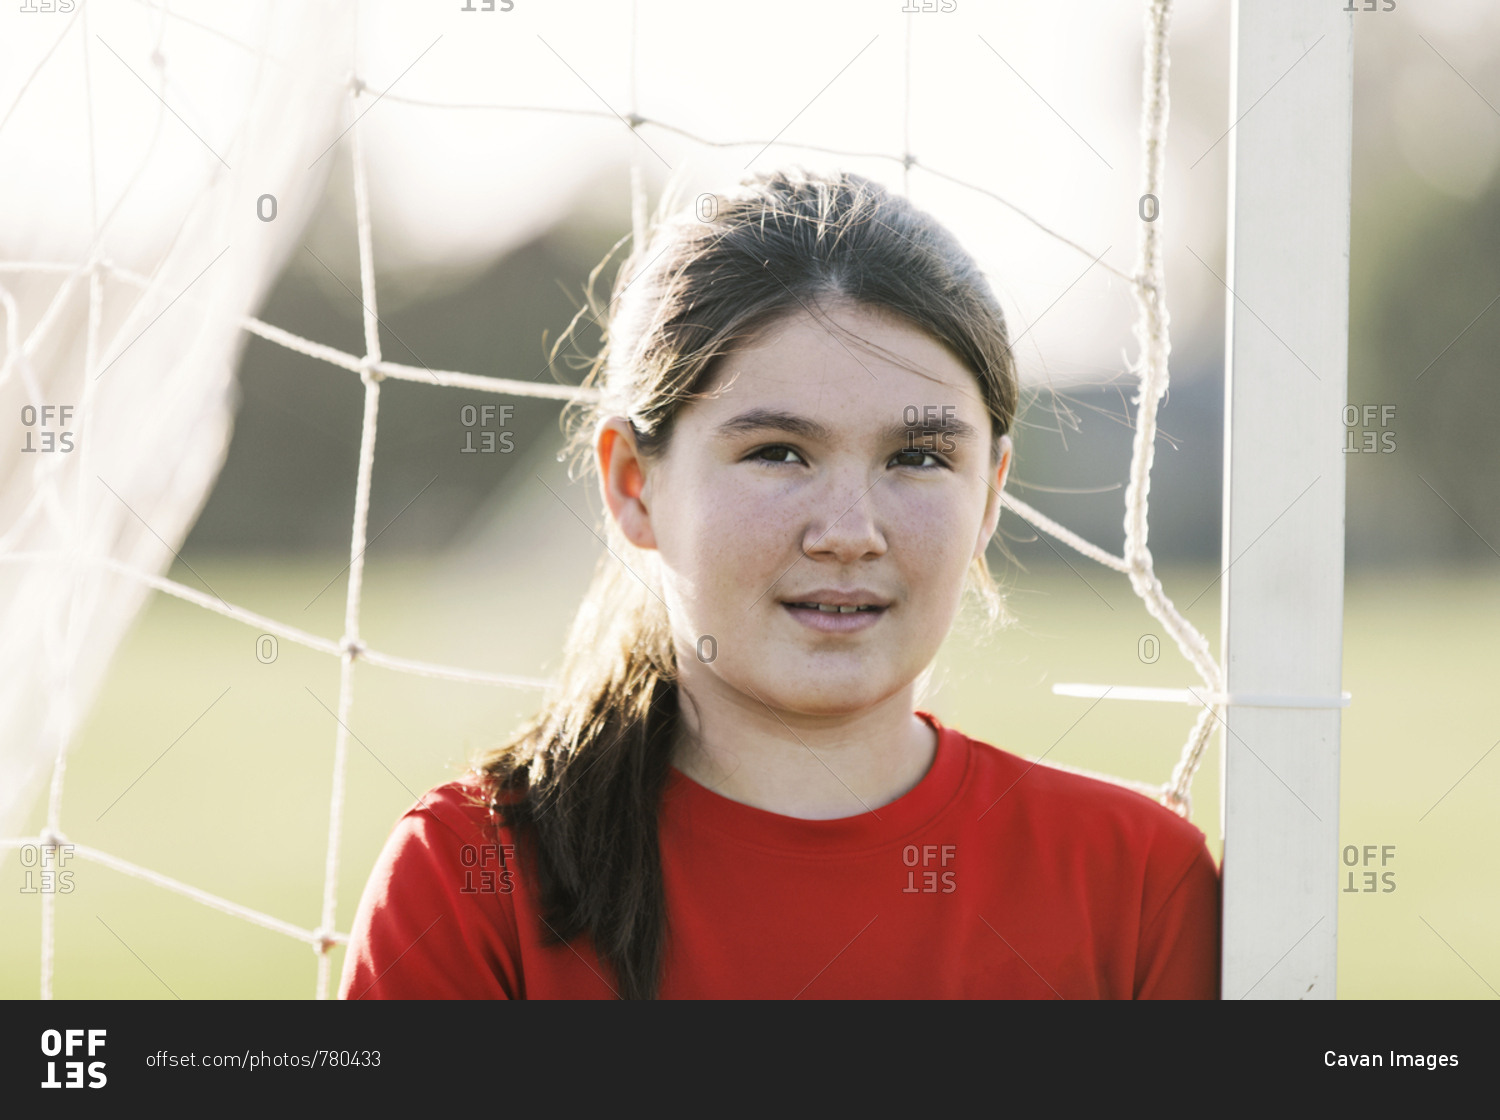 Portrait of confident soccer player wearing red uniform against goal post during sunny day